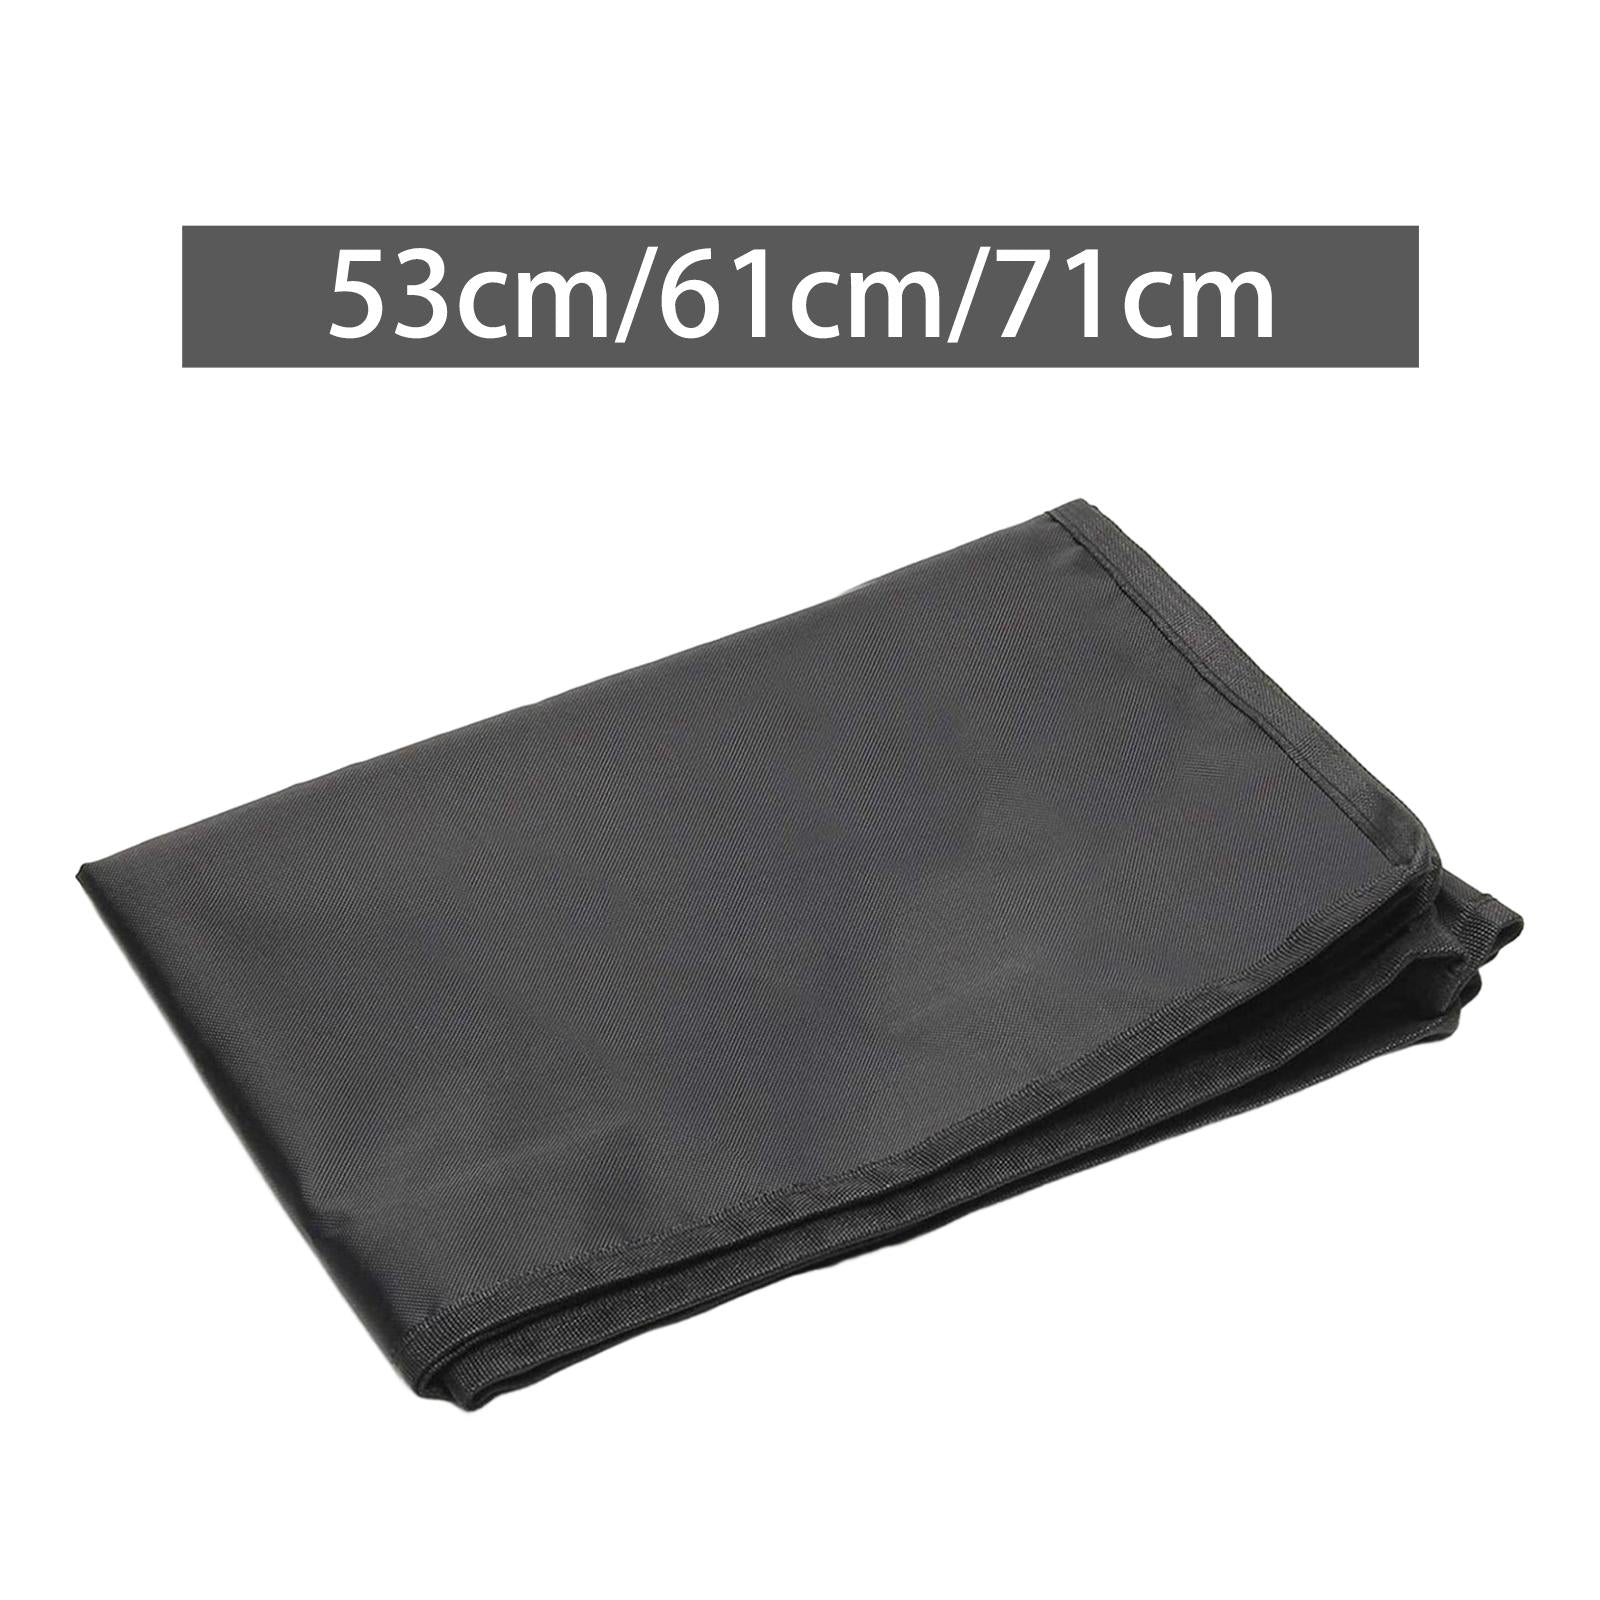 Computer Monitor Dust Cover Accs Computer Screen Protective Sleeve for Hotel 53cmx35cmx9cm